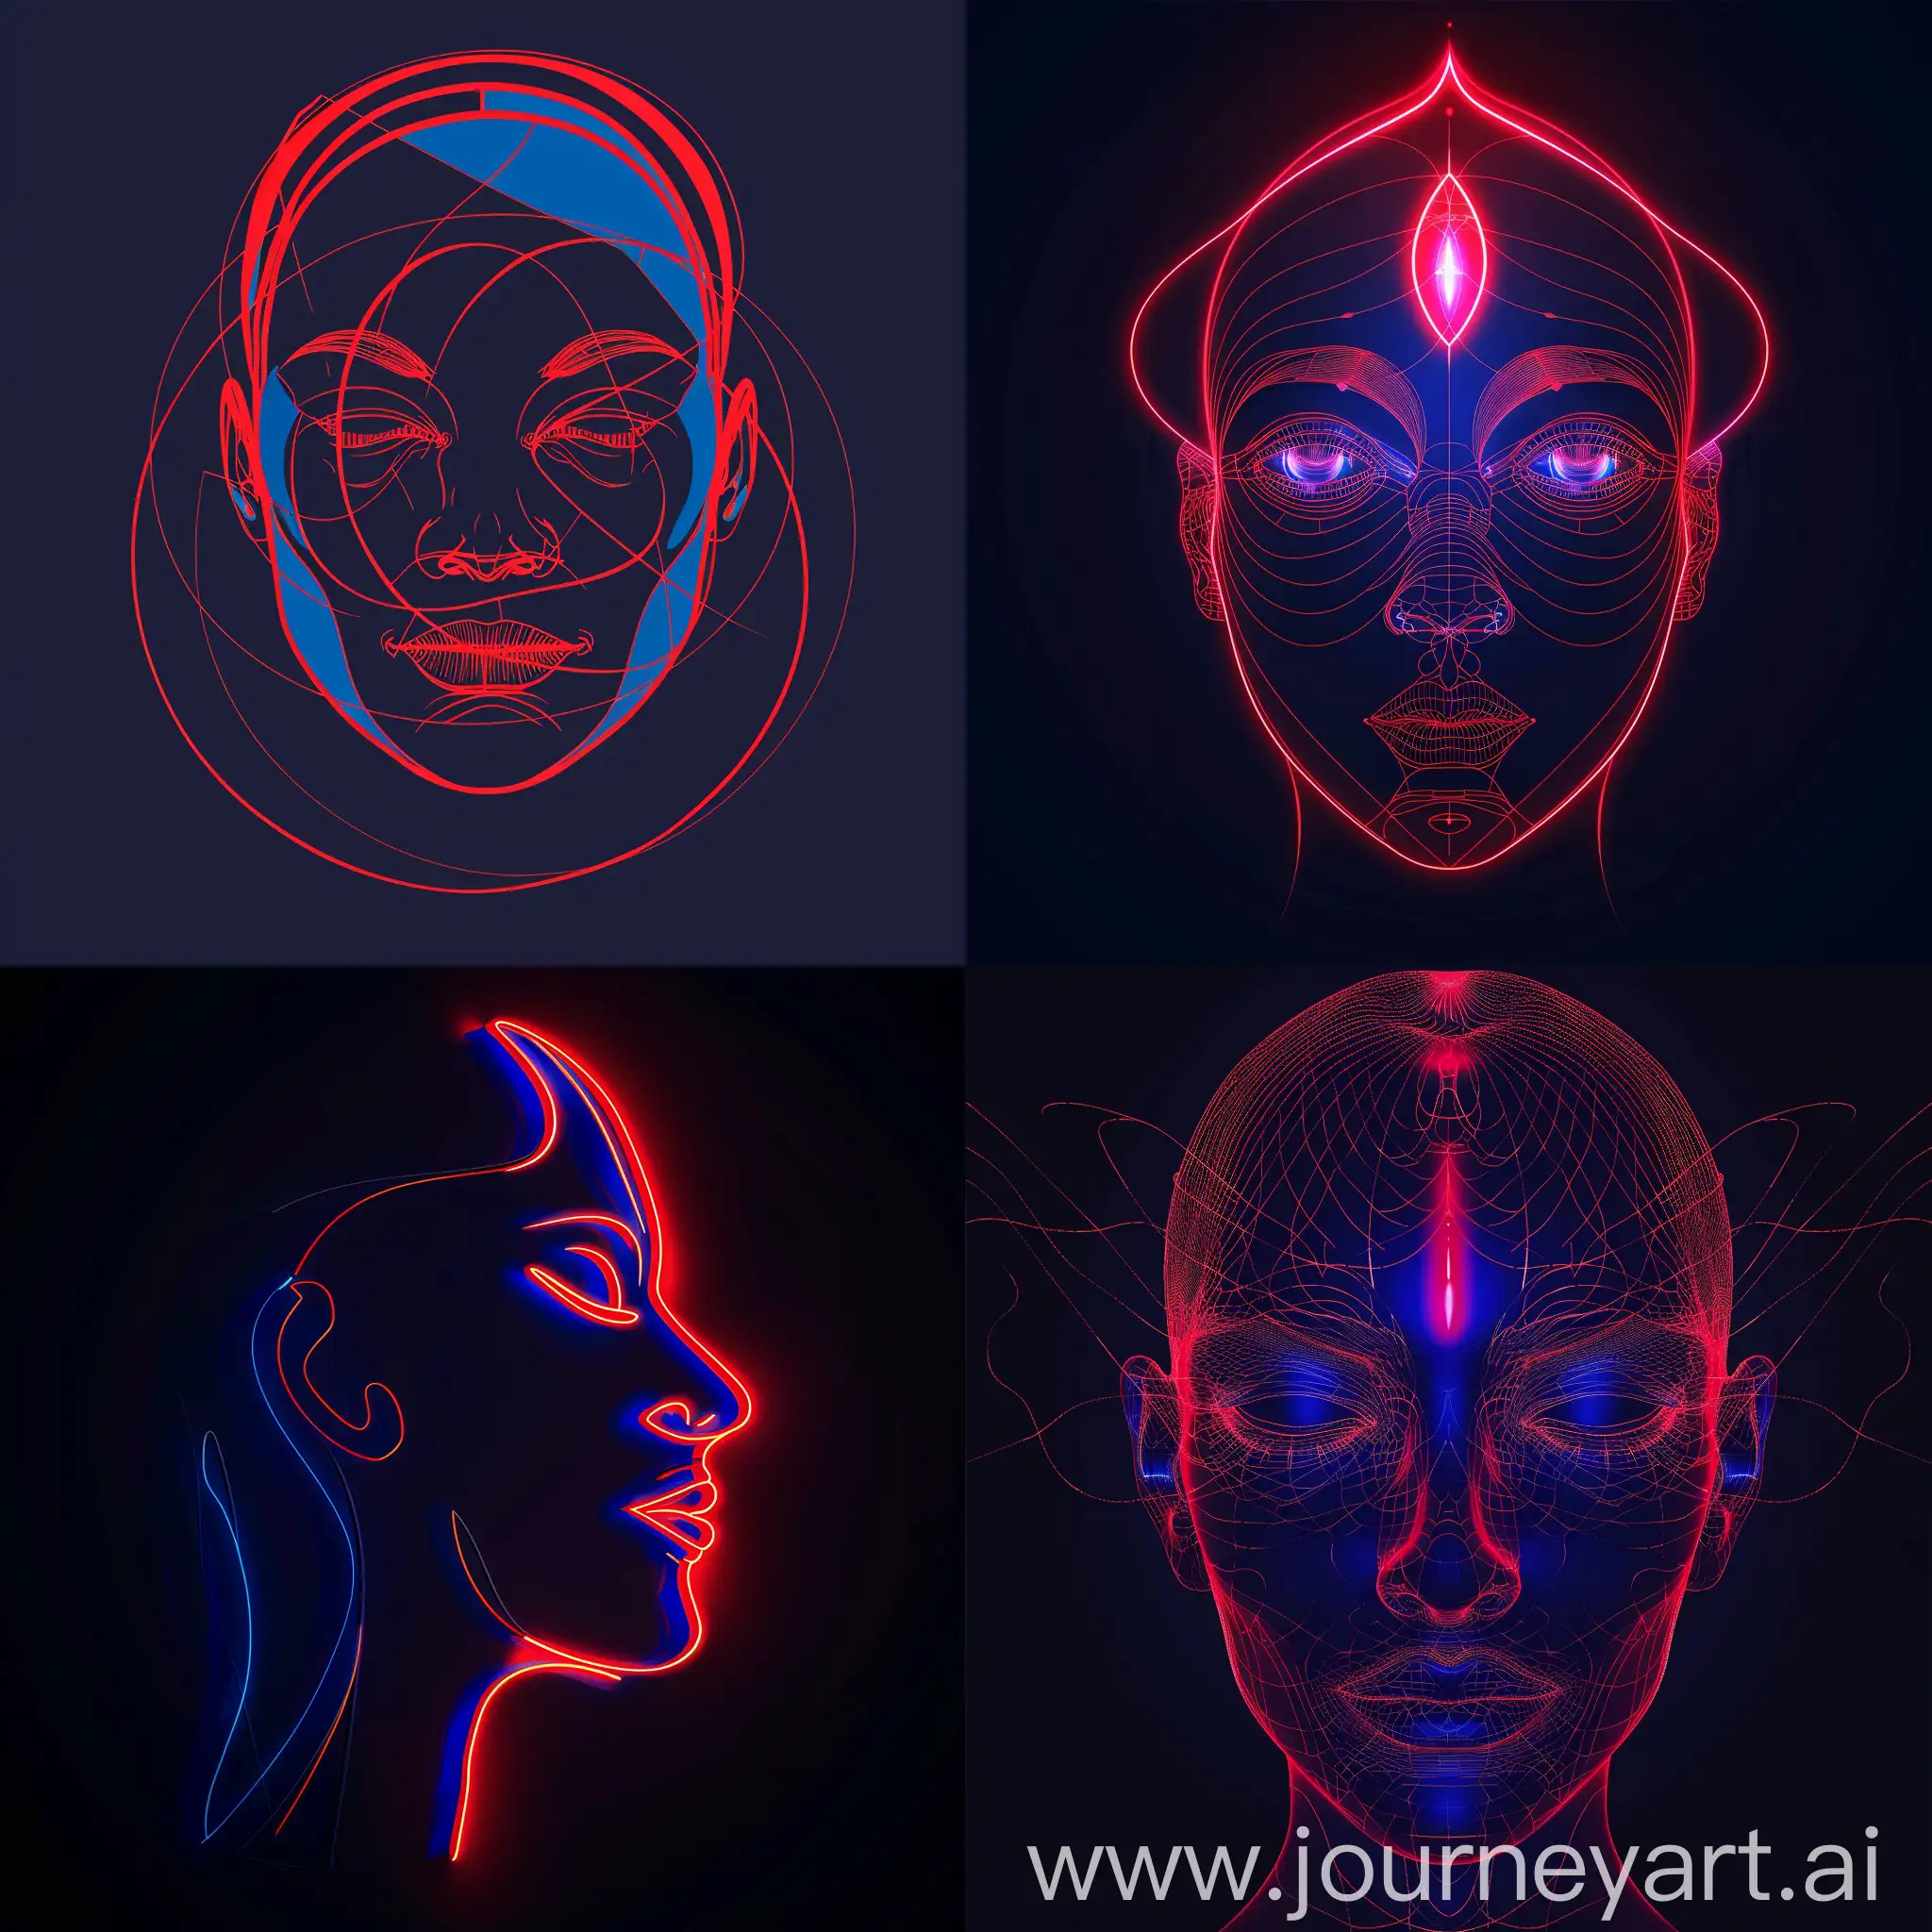 Mystical-Wisdom-Red-and-Blue-Logo-with-Rational-Lines-and-Sacred-Faces